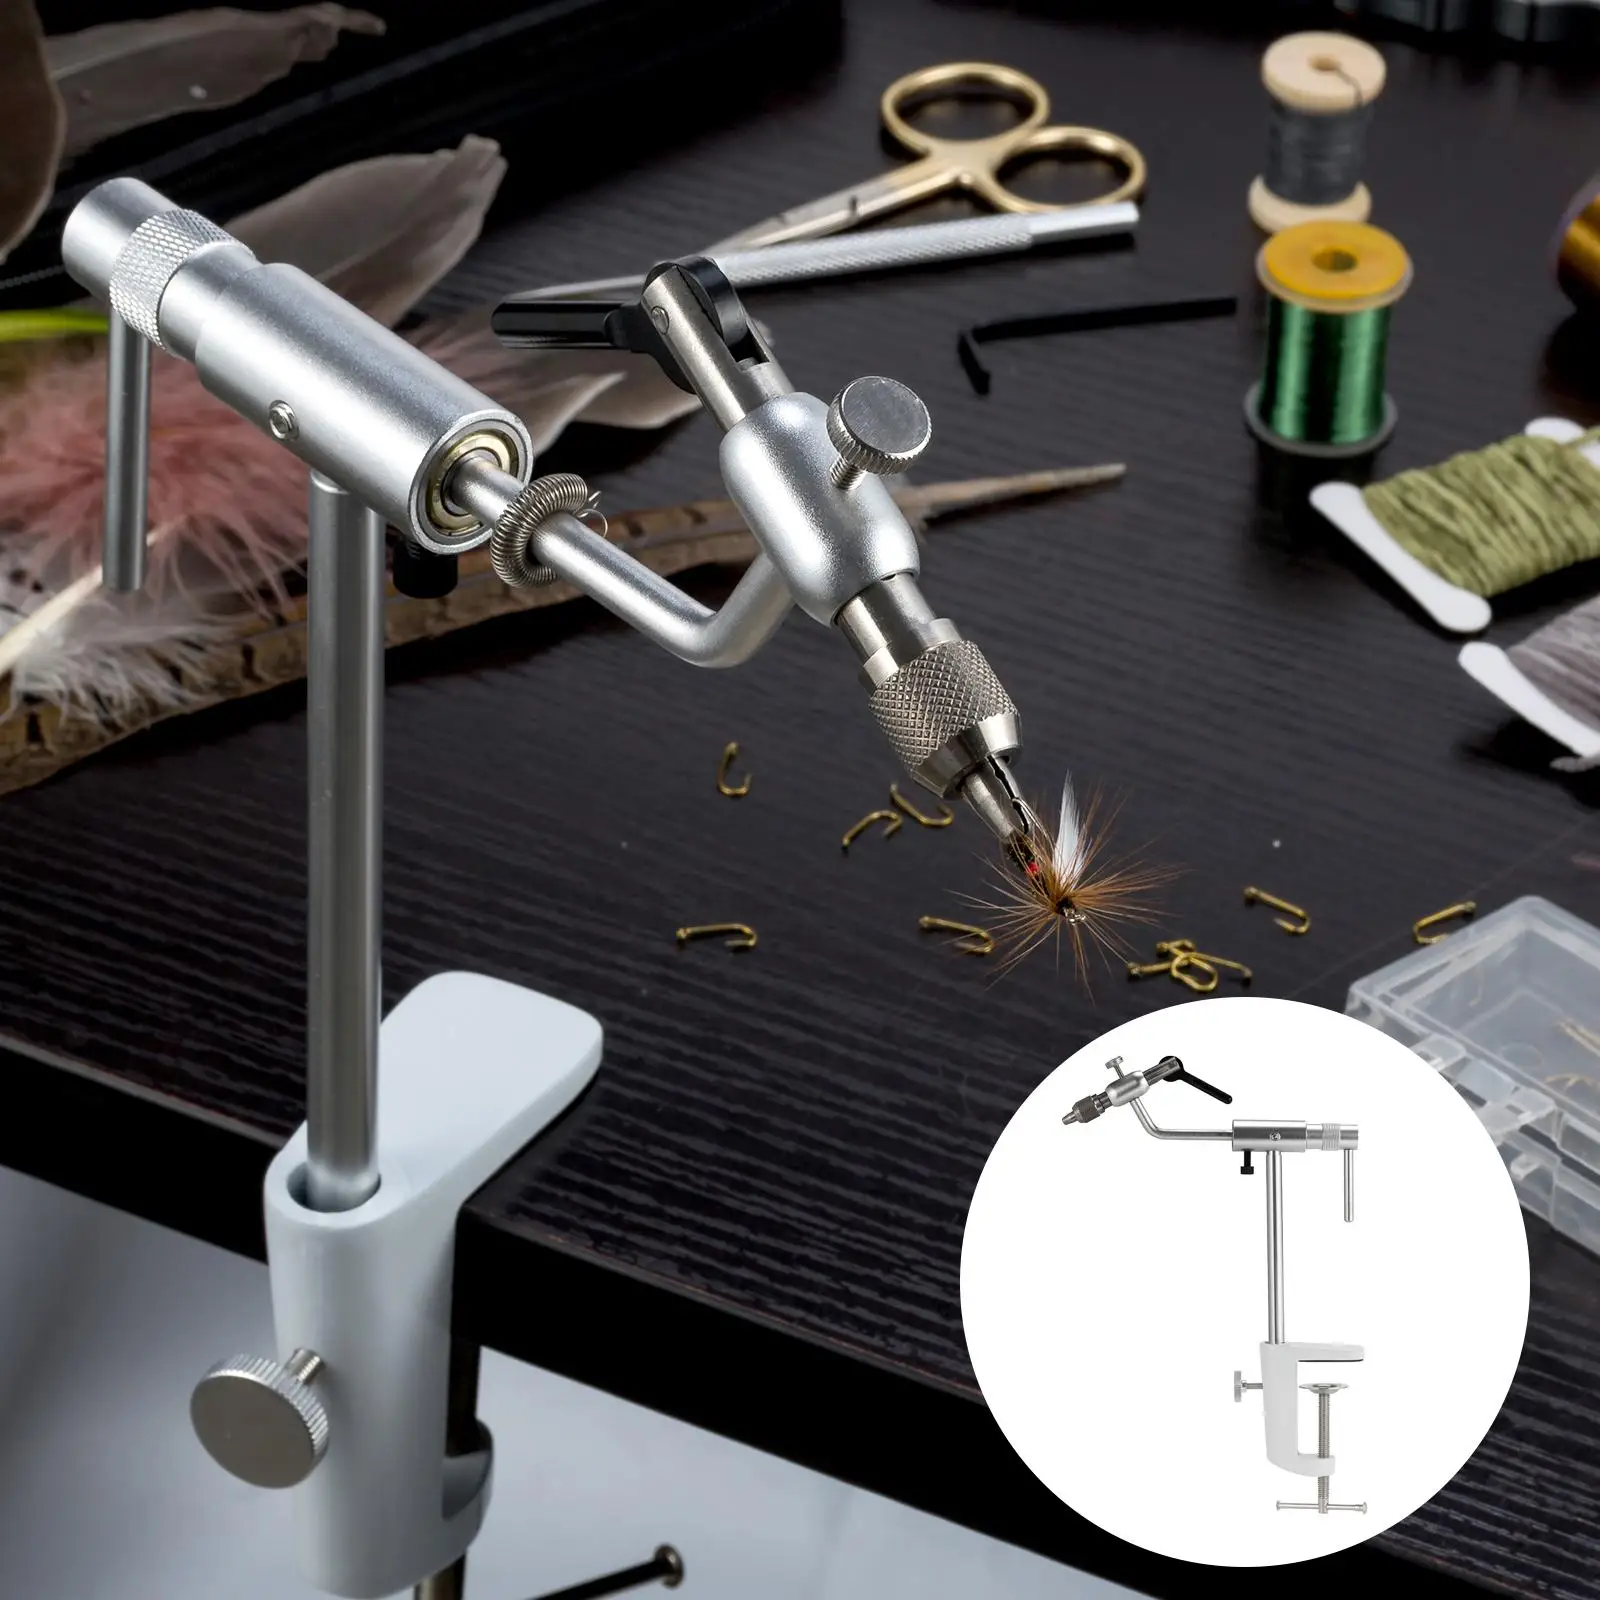 Rotary Fly Tying Vise, Practical Fly Fishing Vise with 360 Rotation and